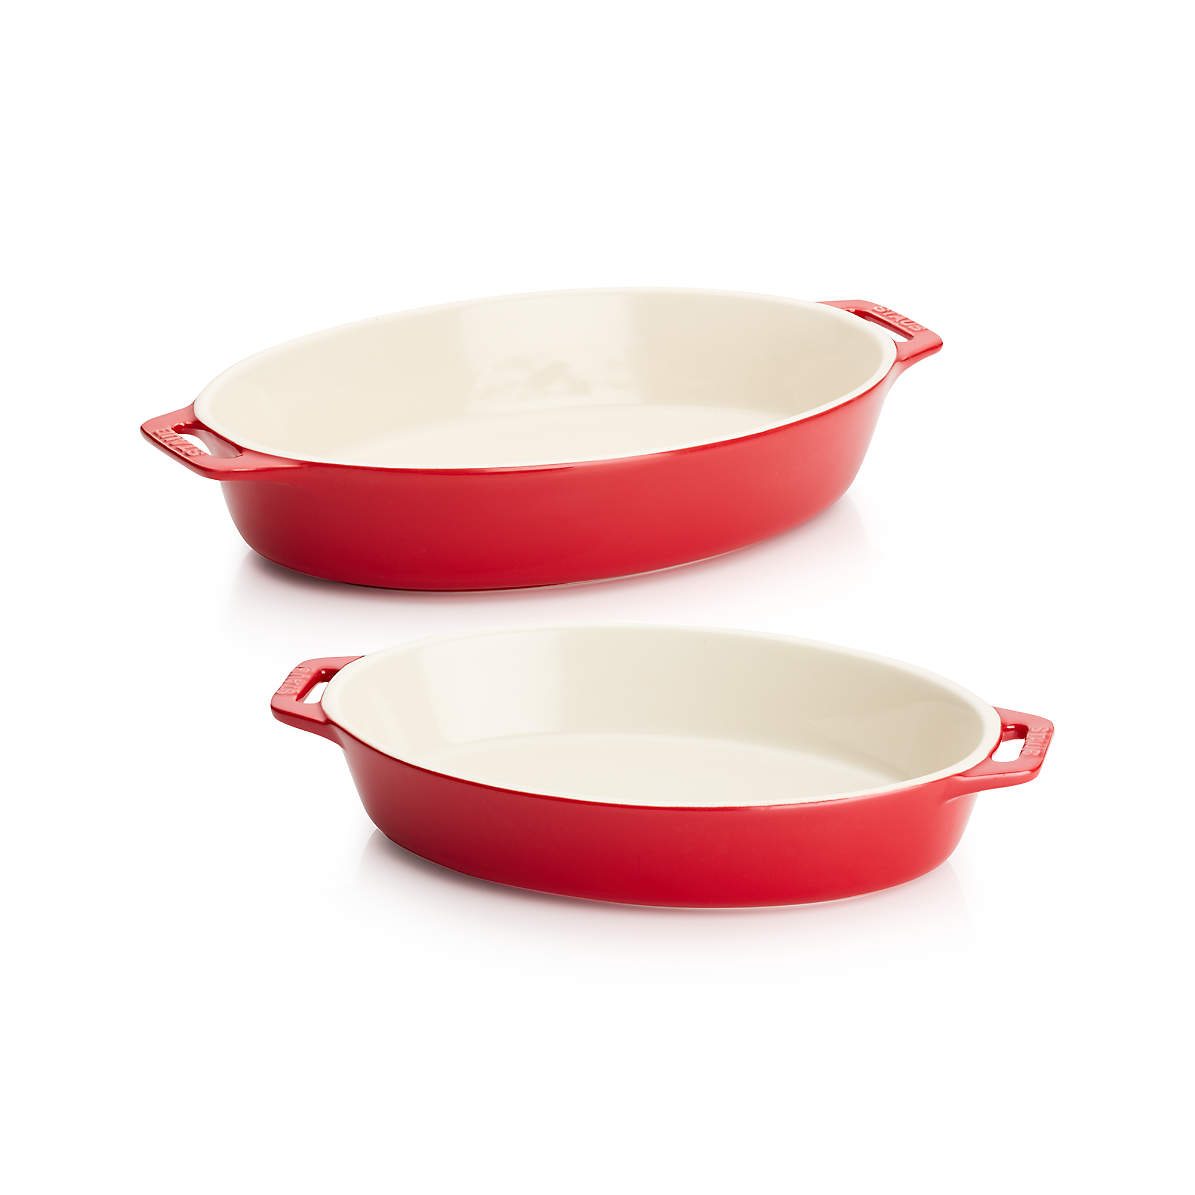 Shop Staub Oval Covered Baking Dish/9 x 6.6